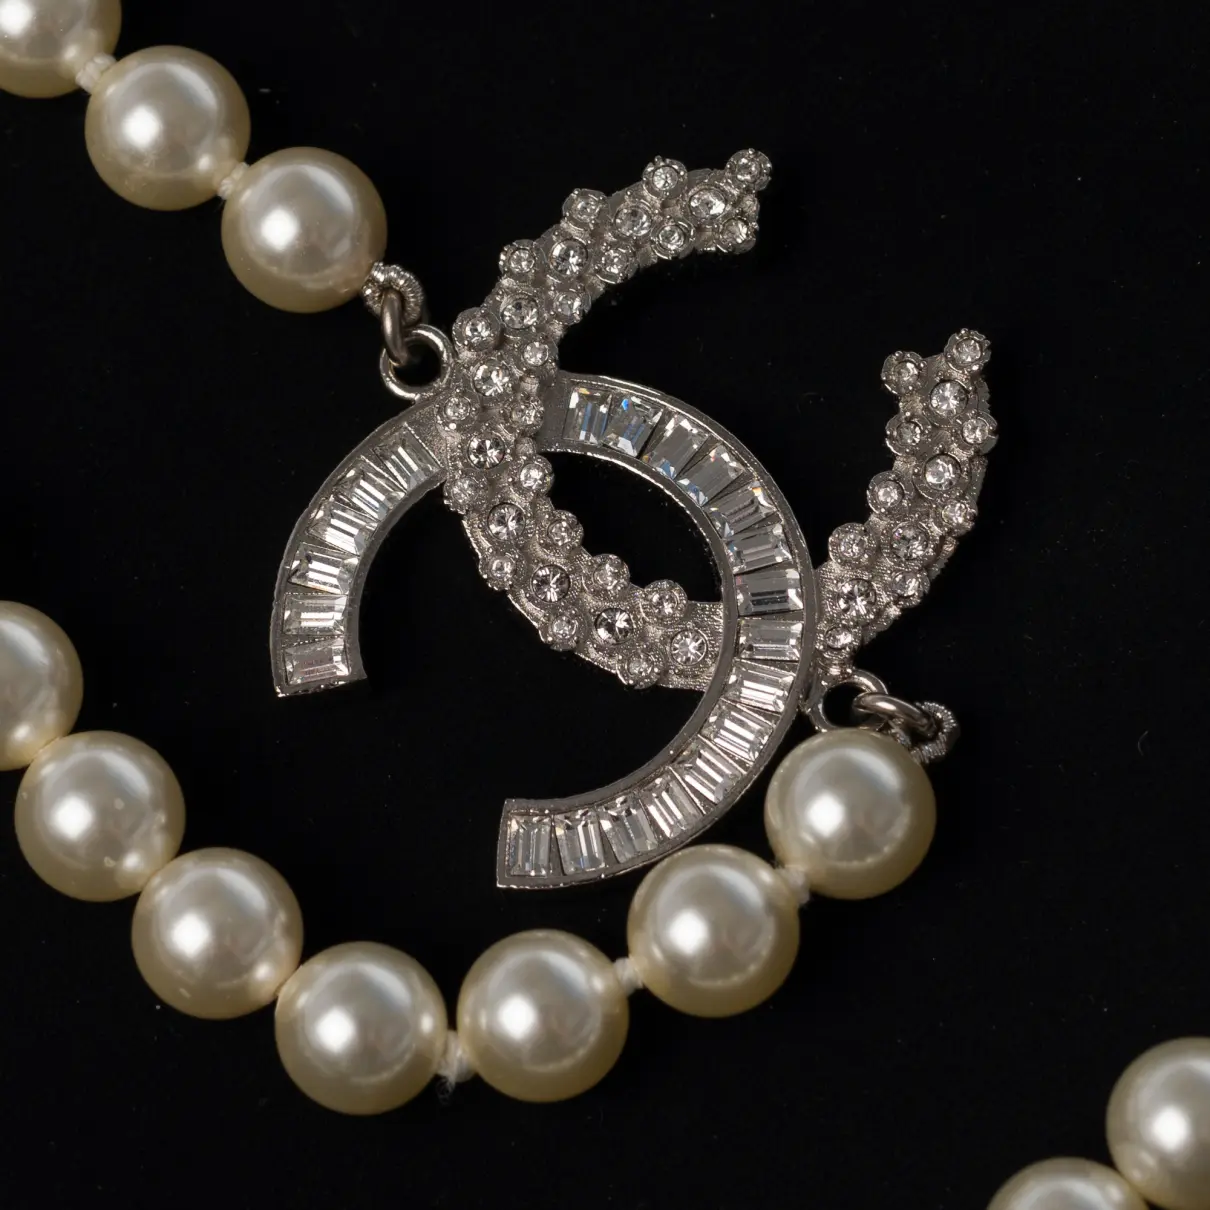 Buy Chanel Pearls long necklace online